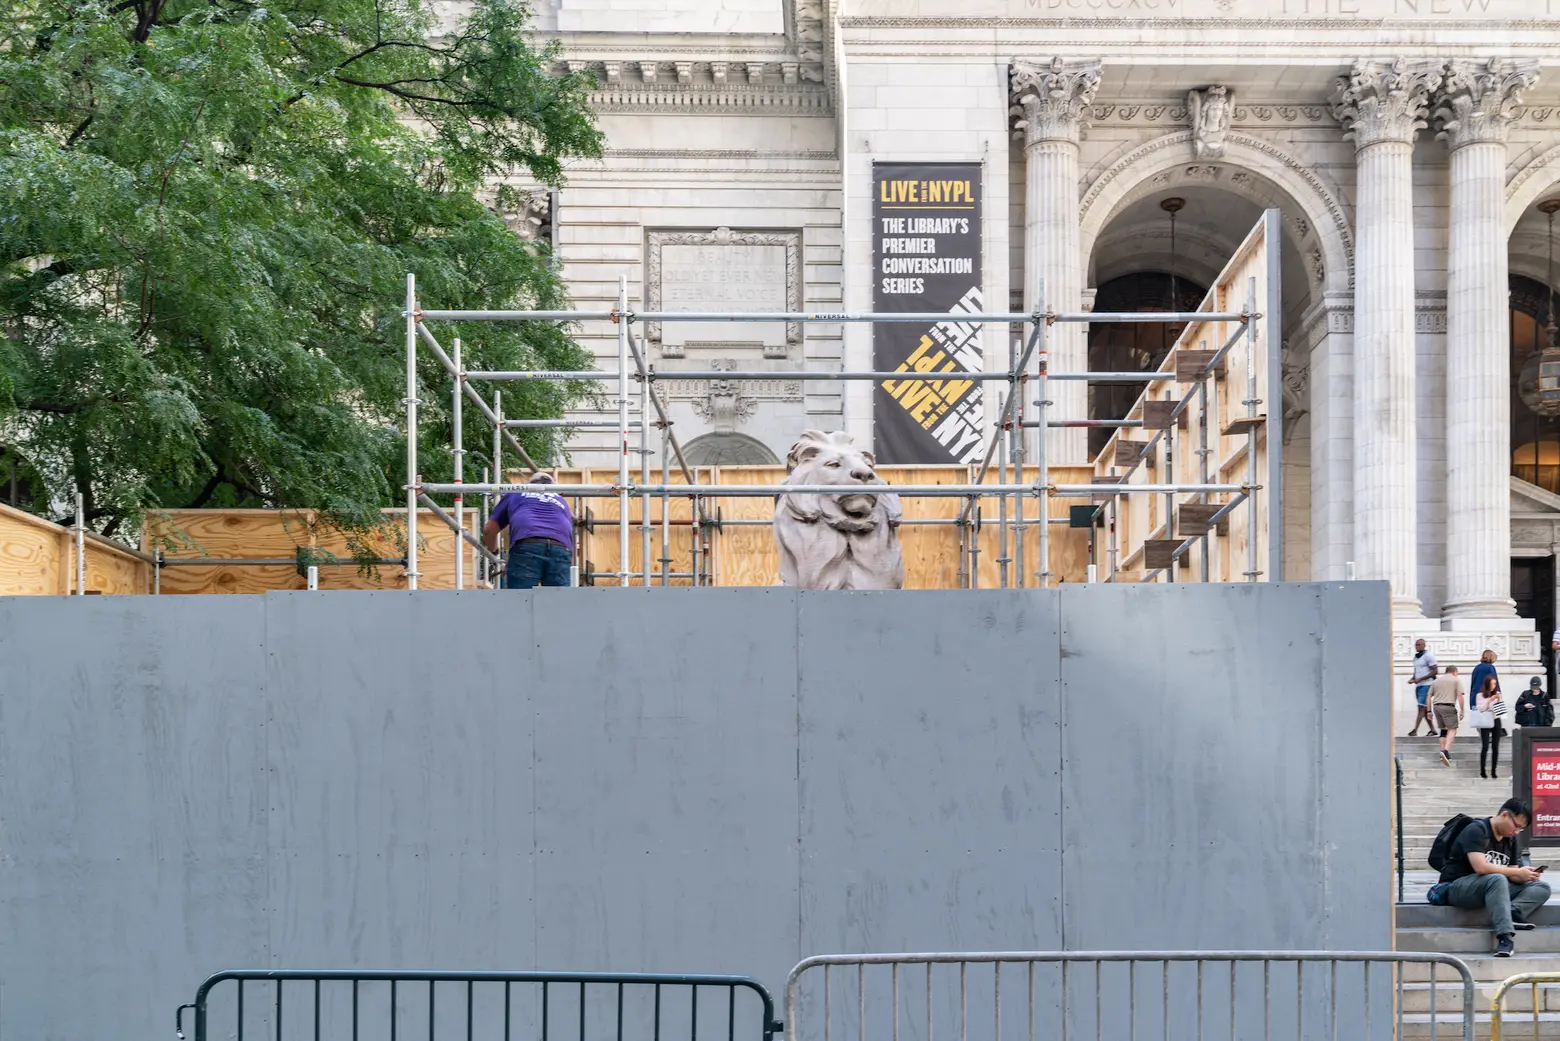 New York Public Library, Library Lions, Restoration, Patience, Fortitude